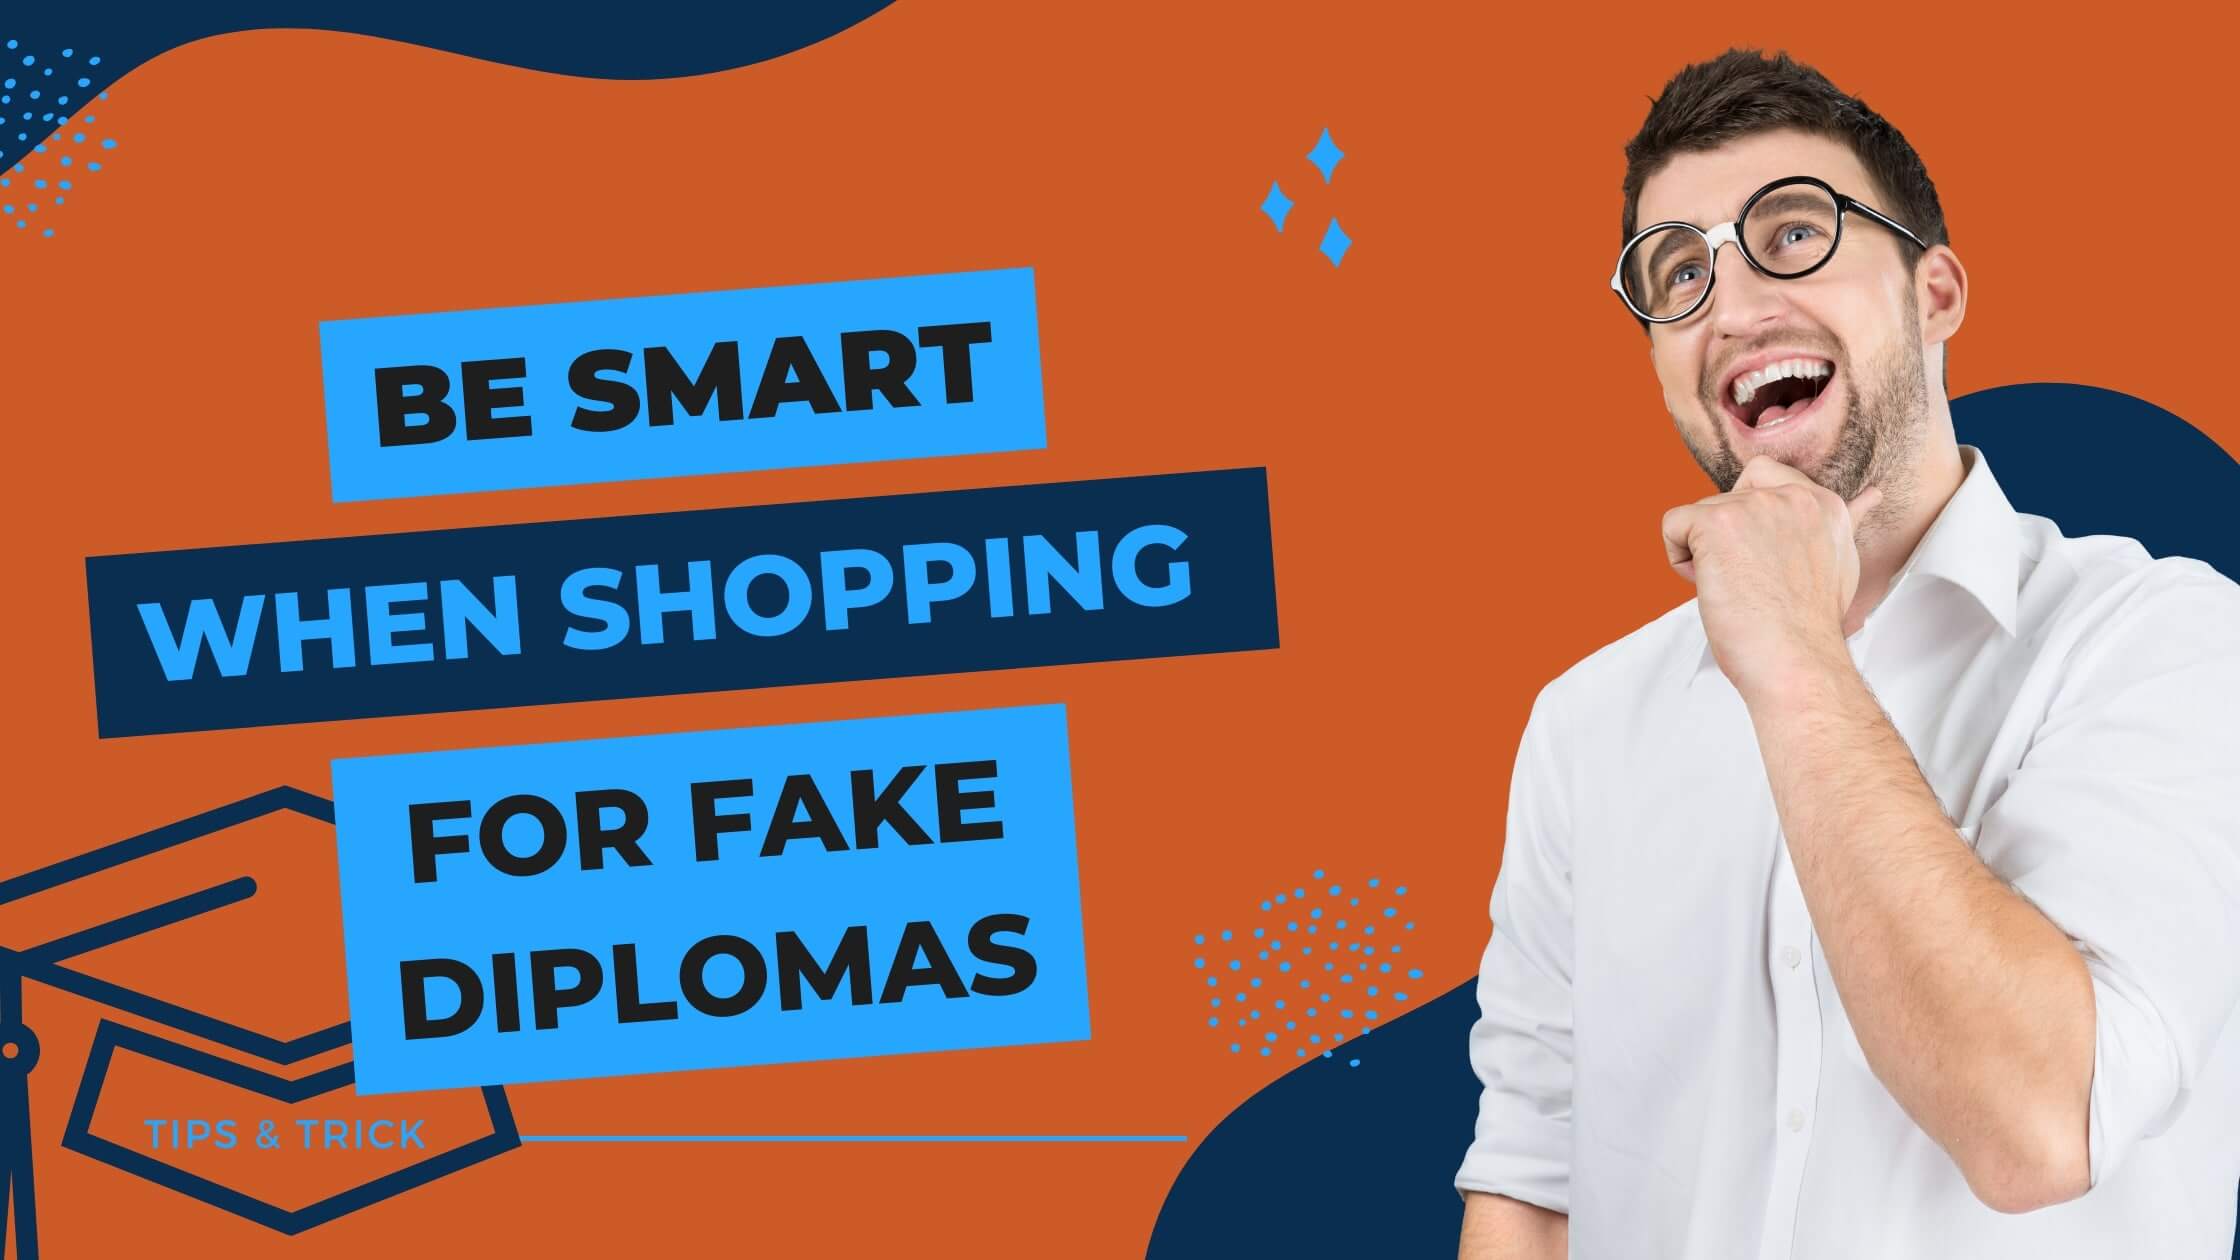 guy with glasses and white shirt thinking really hard about buying fake diplomas online and being smart about it.